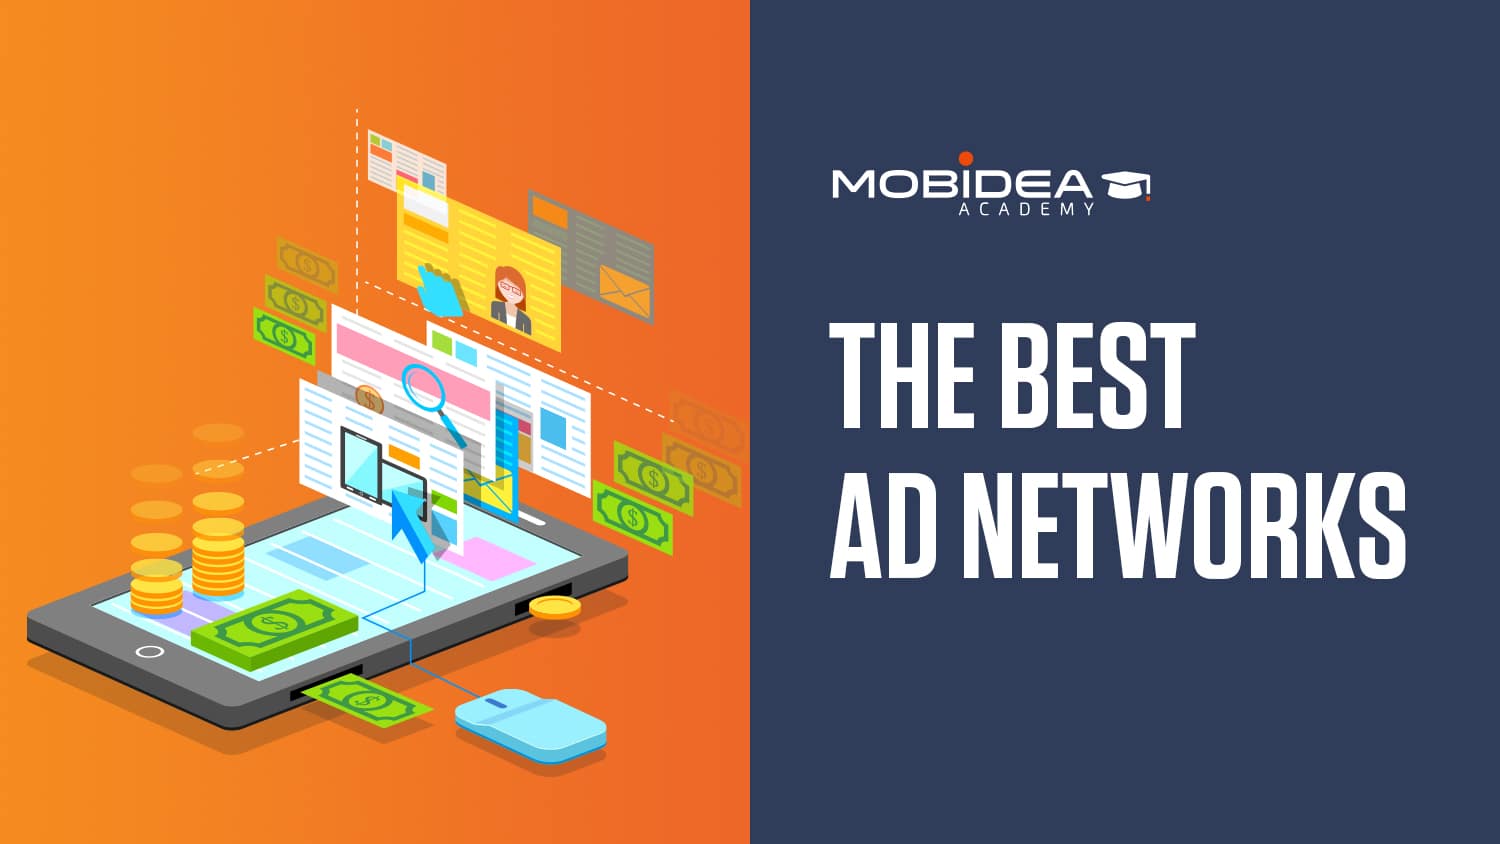 Best High CPM Ad Network for Publishers in 2023